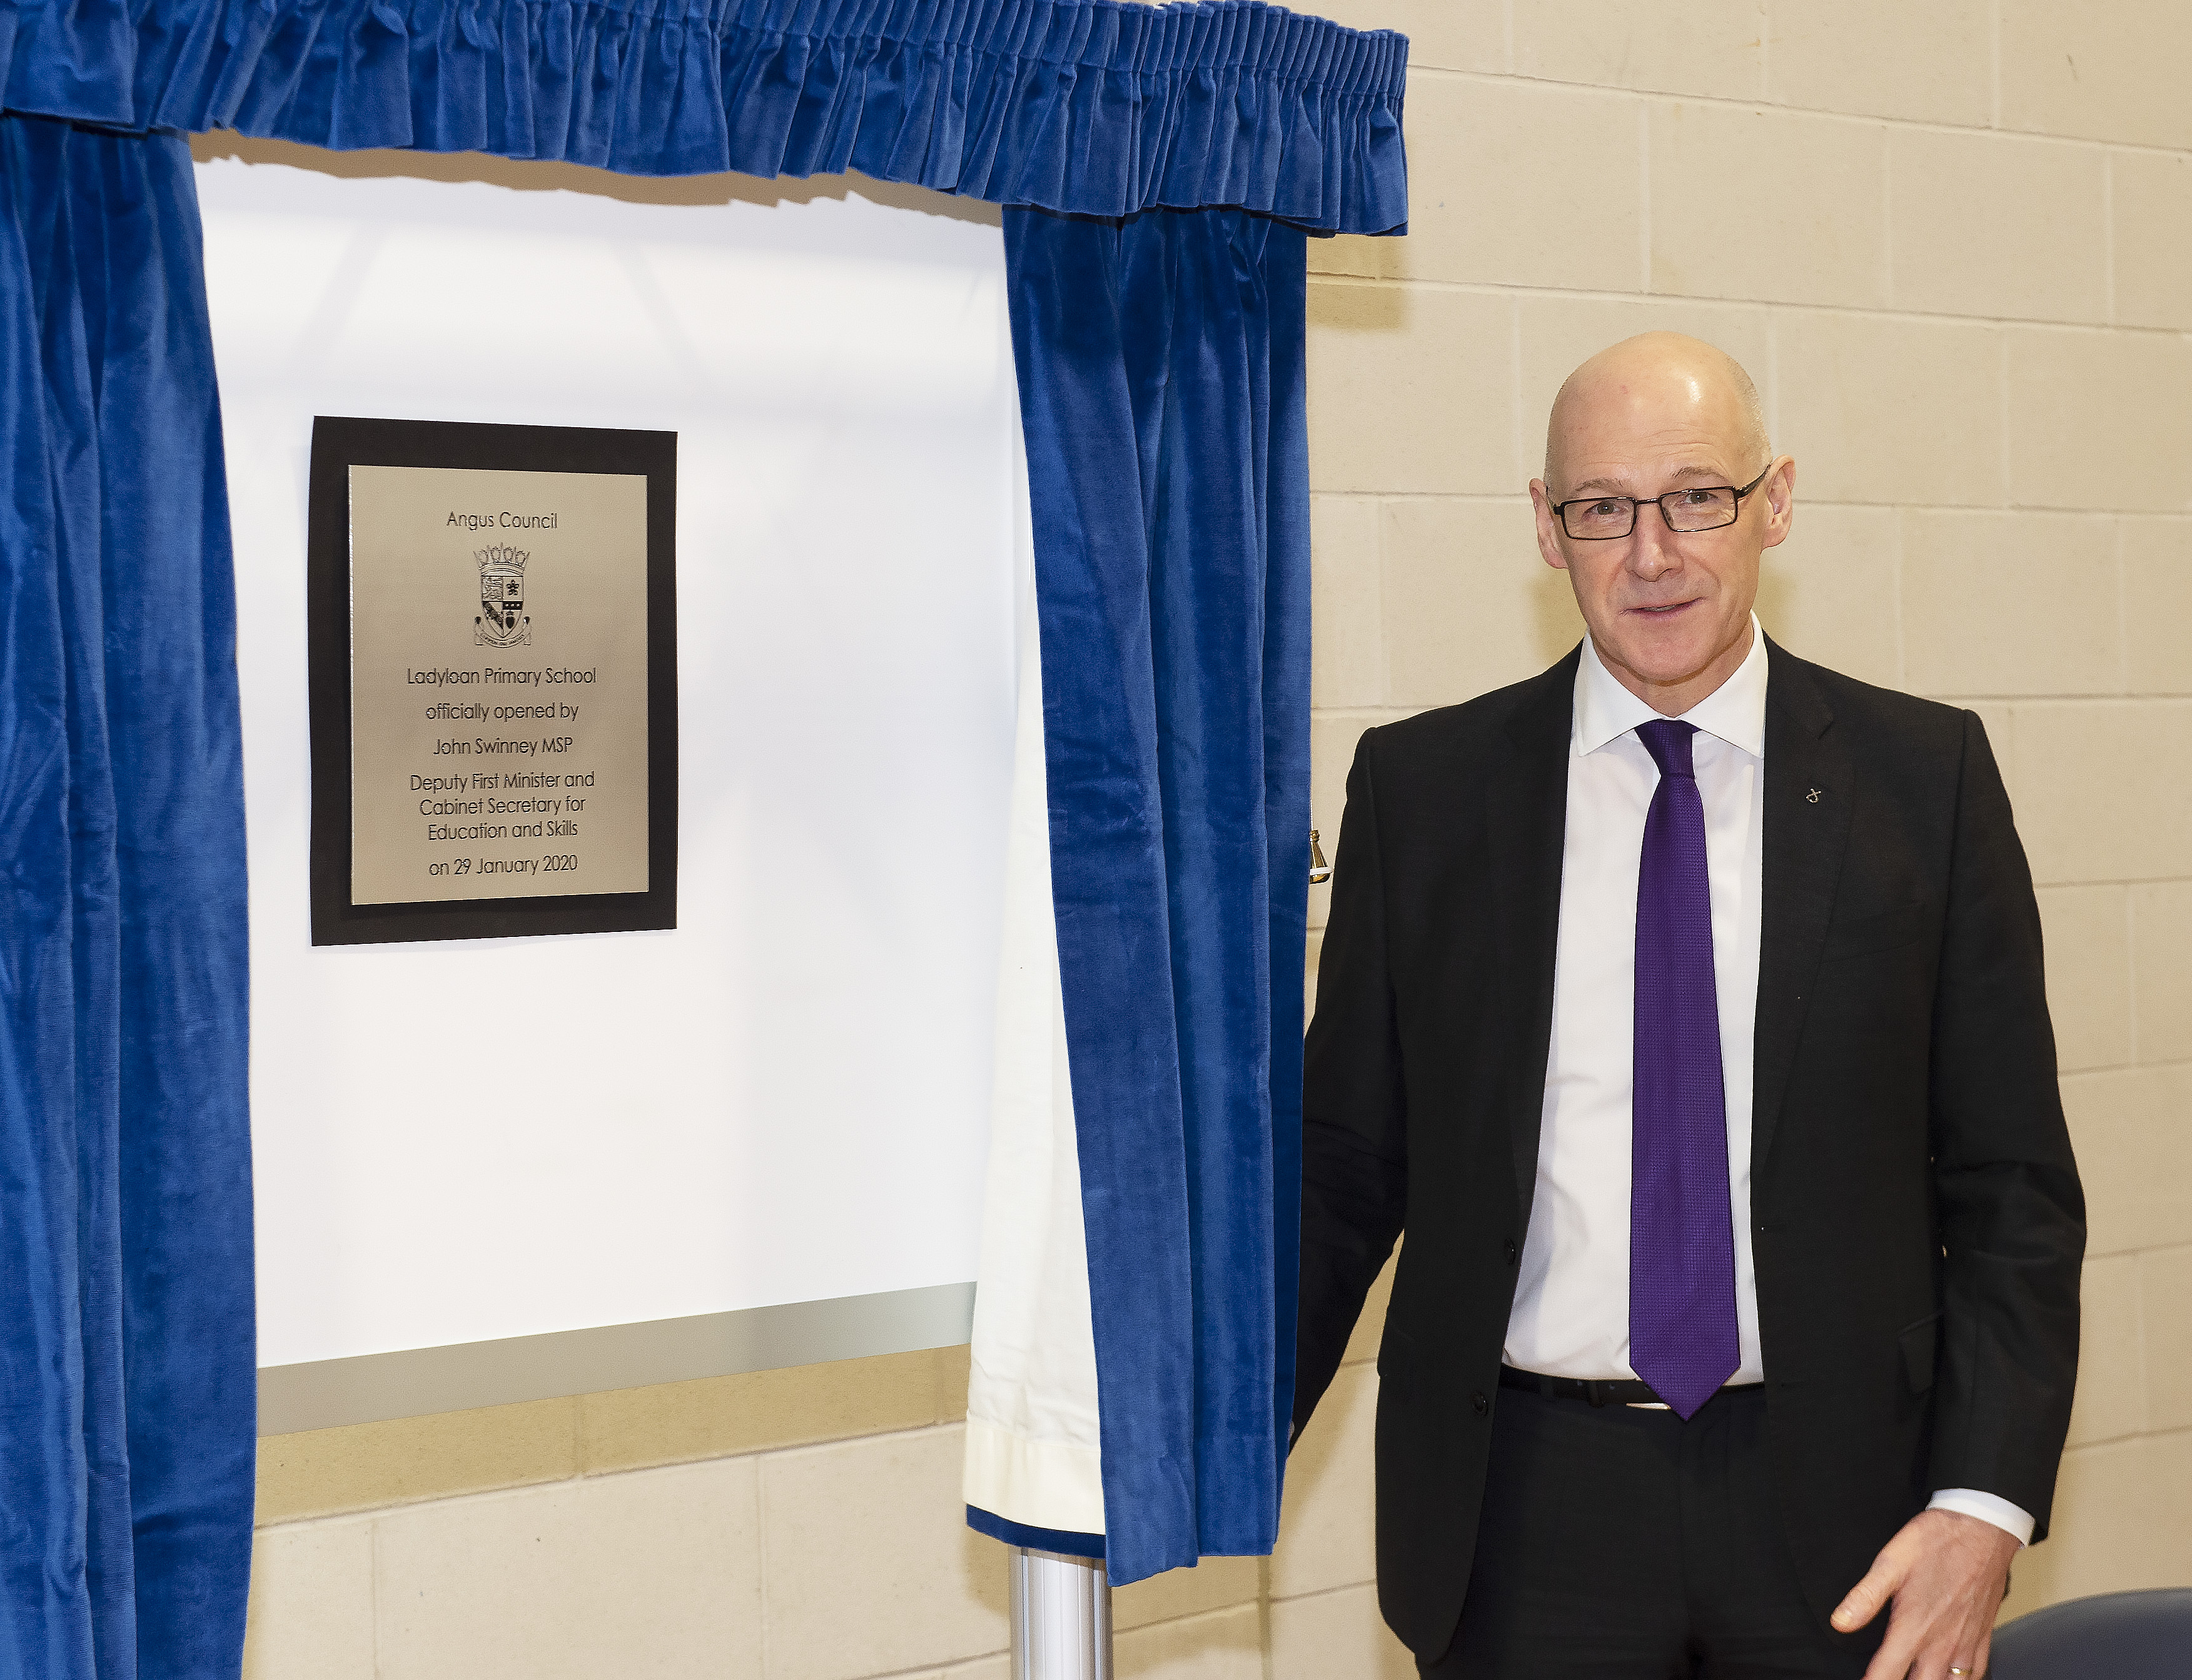 New Angus schools officially opened by Deputy First Minister John Swinney